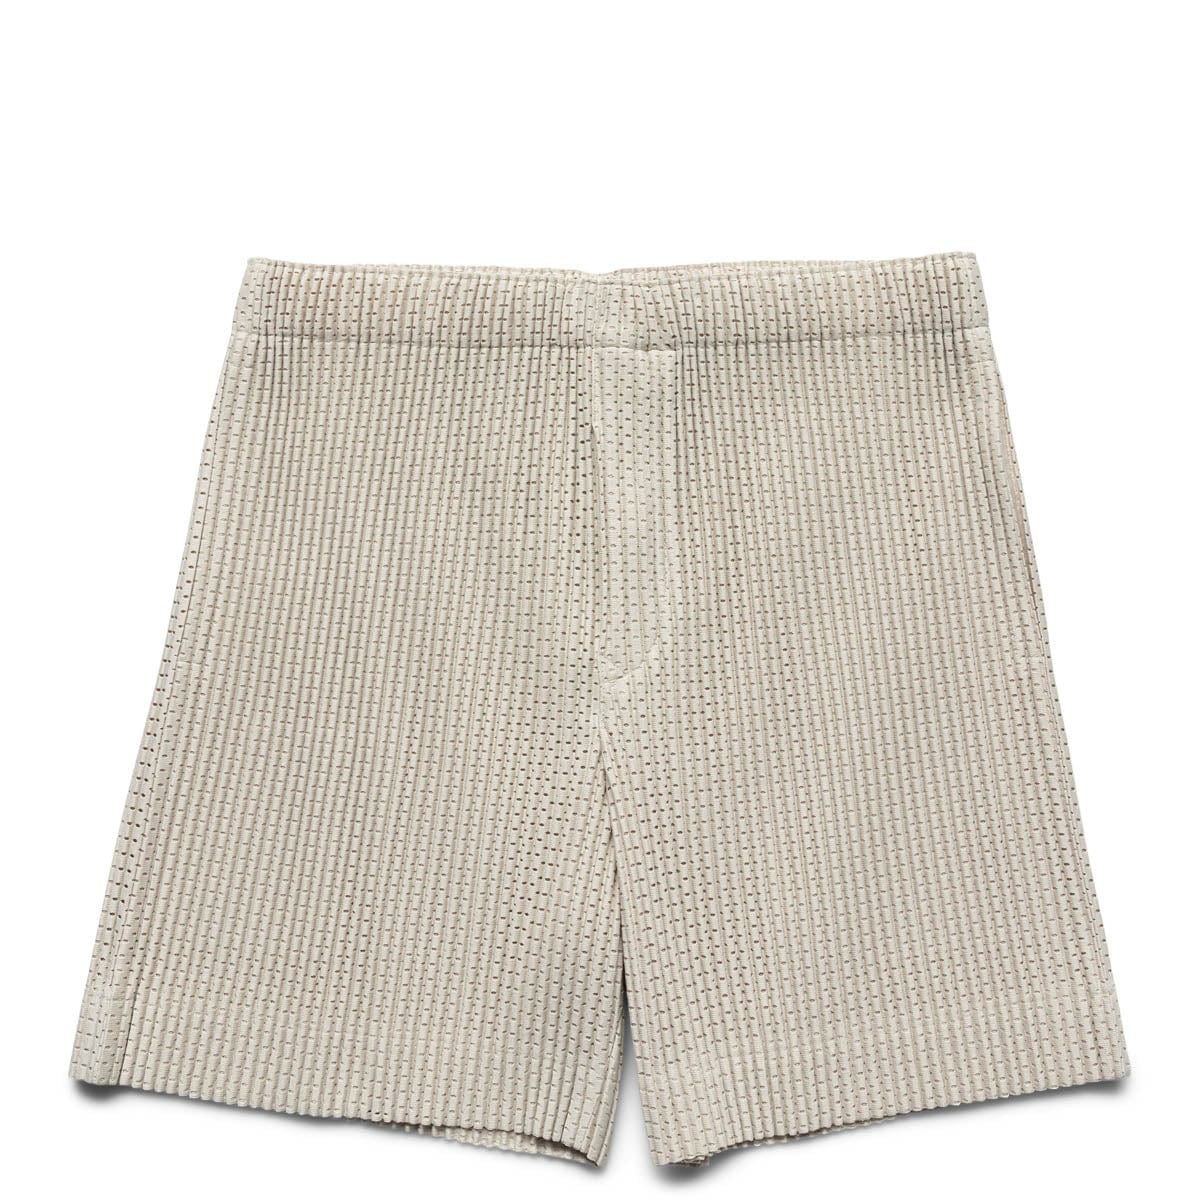 OUTER MESH 03-IVORY | GmarShops